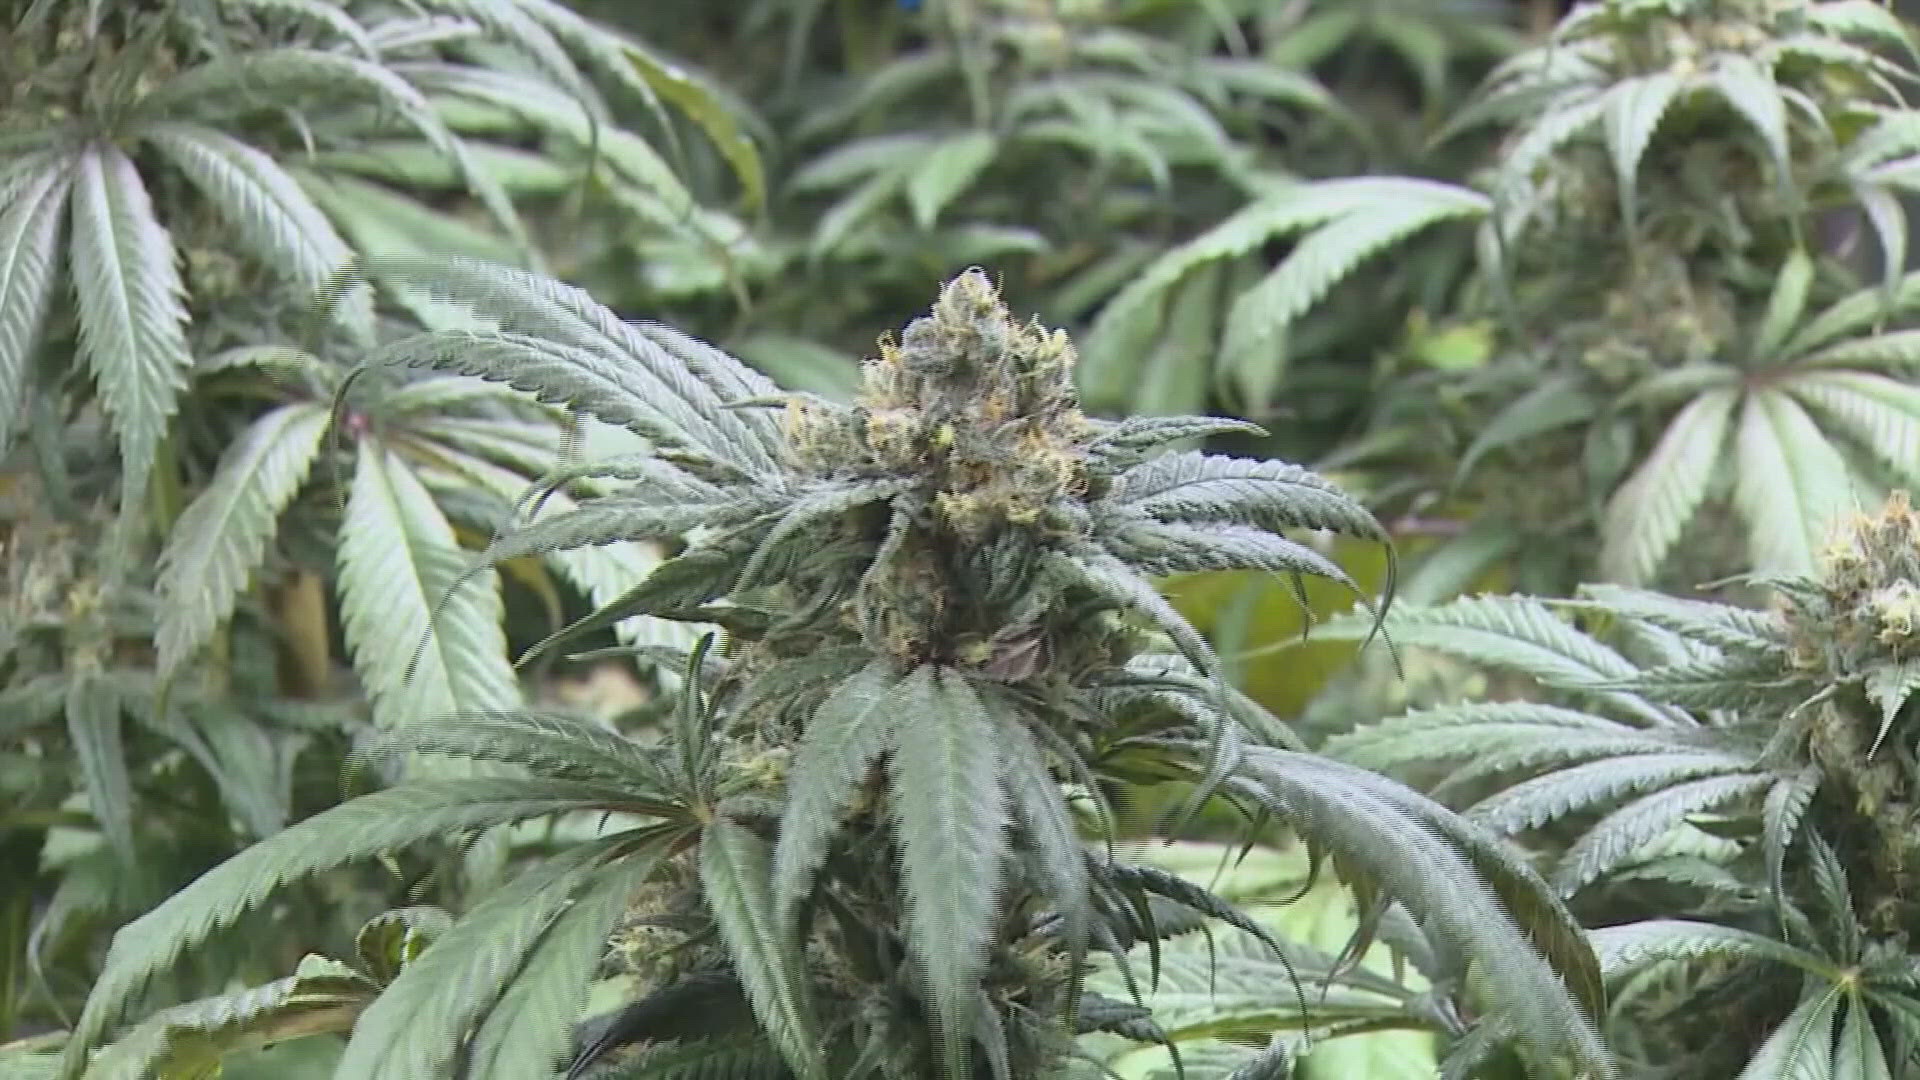 9NEWS Medical Expert Dr. Payal Kohli weighs in on a move by the DEA to reclassify marijuana as a lower risk drug.